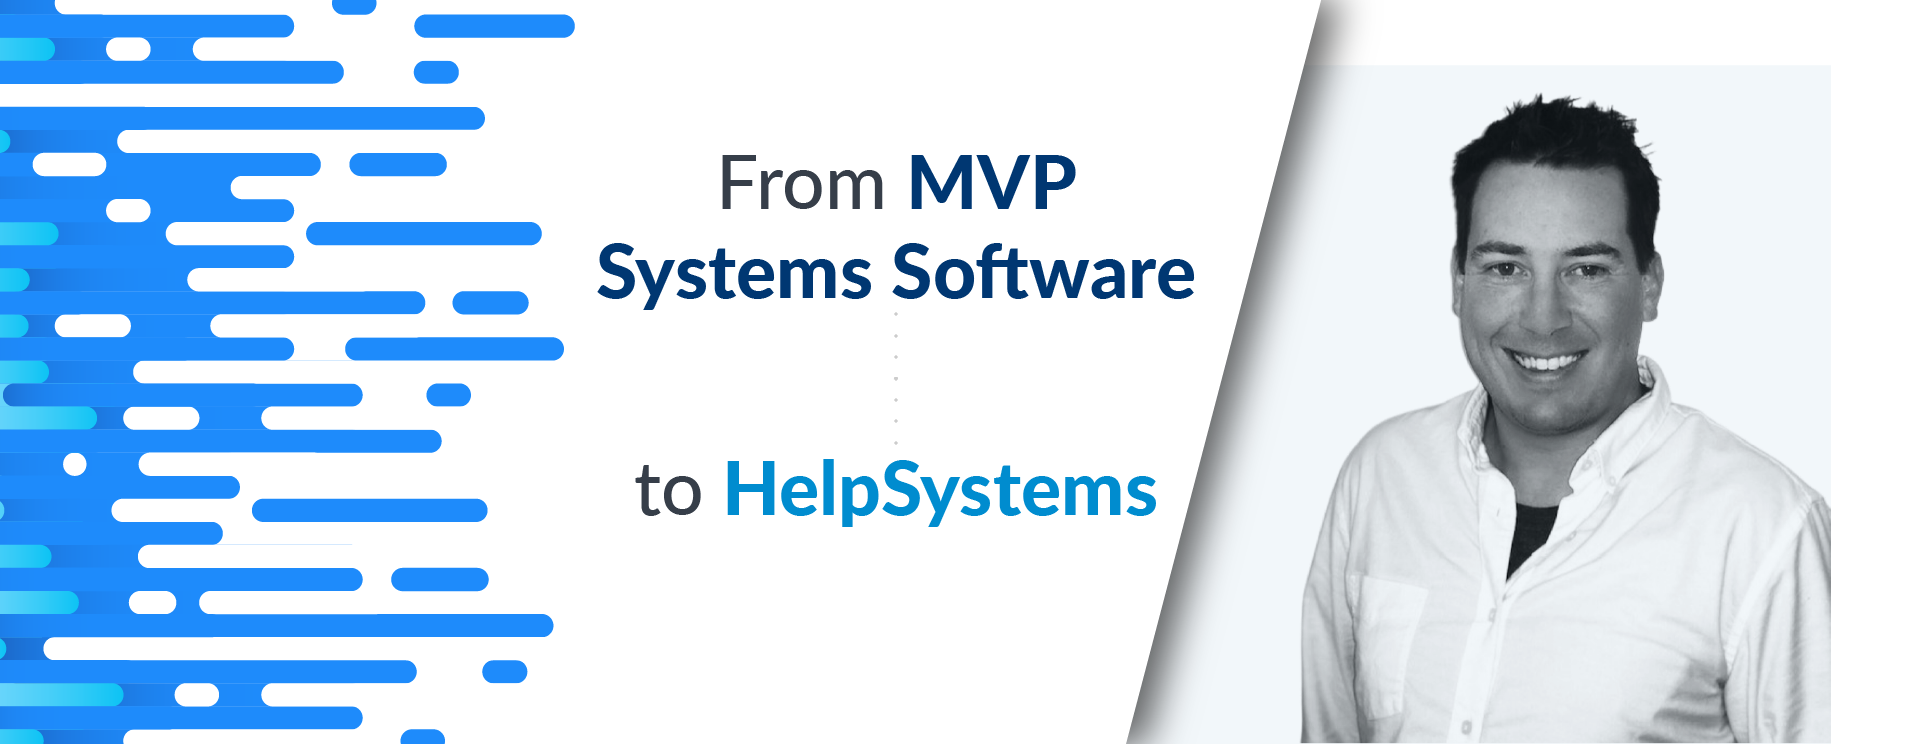 Helpsystems acquisition of MVP Systems Software with Jon Spencer